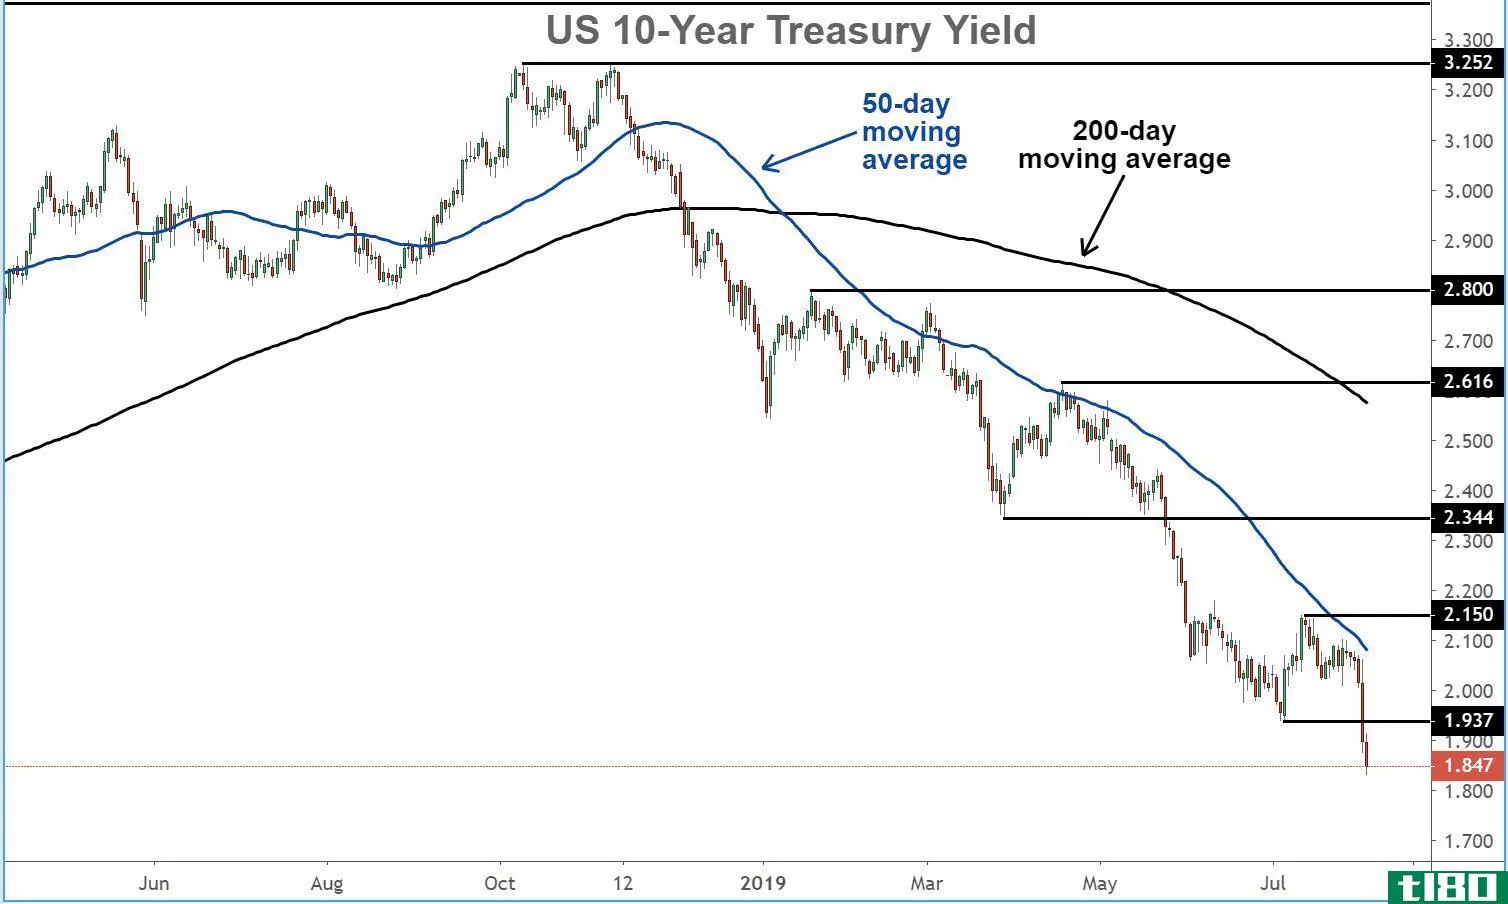 Chart showing the performance of the U.S. 10-year Treasury yield